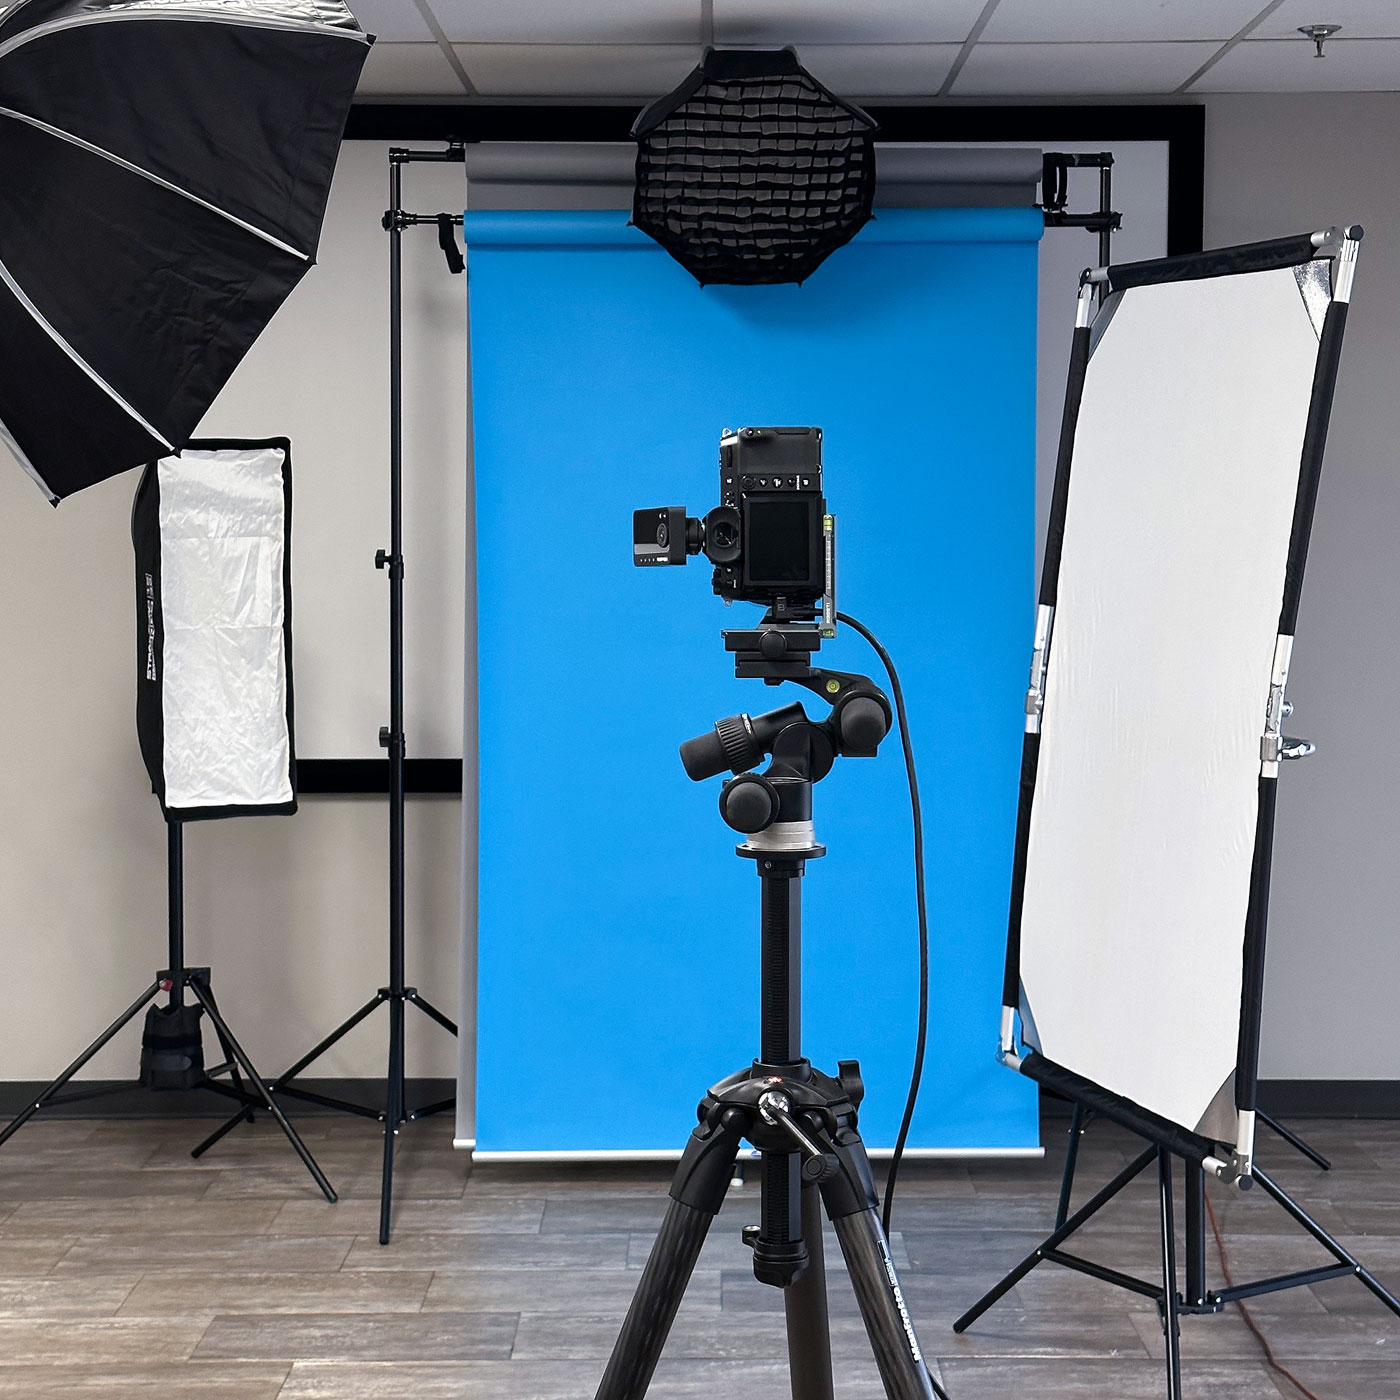 Professional headshots by Warren Diggles. A behind the scenes look at our mobile portrait studio.